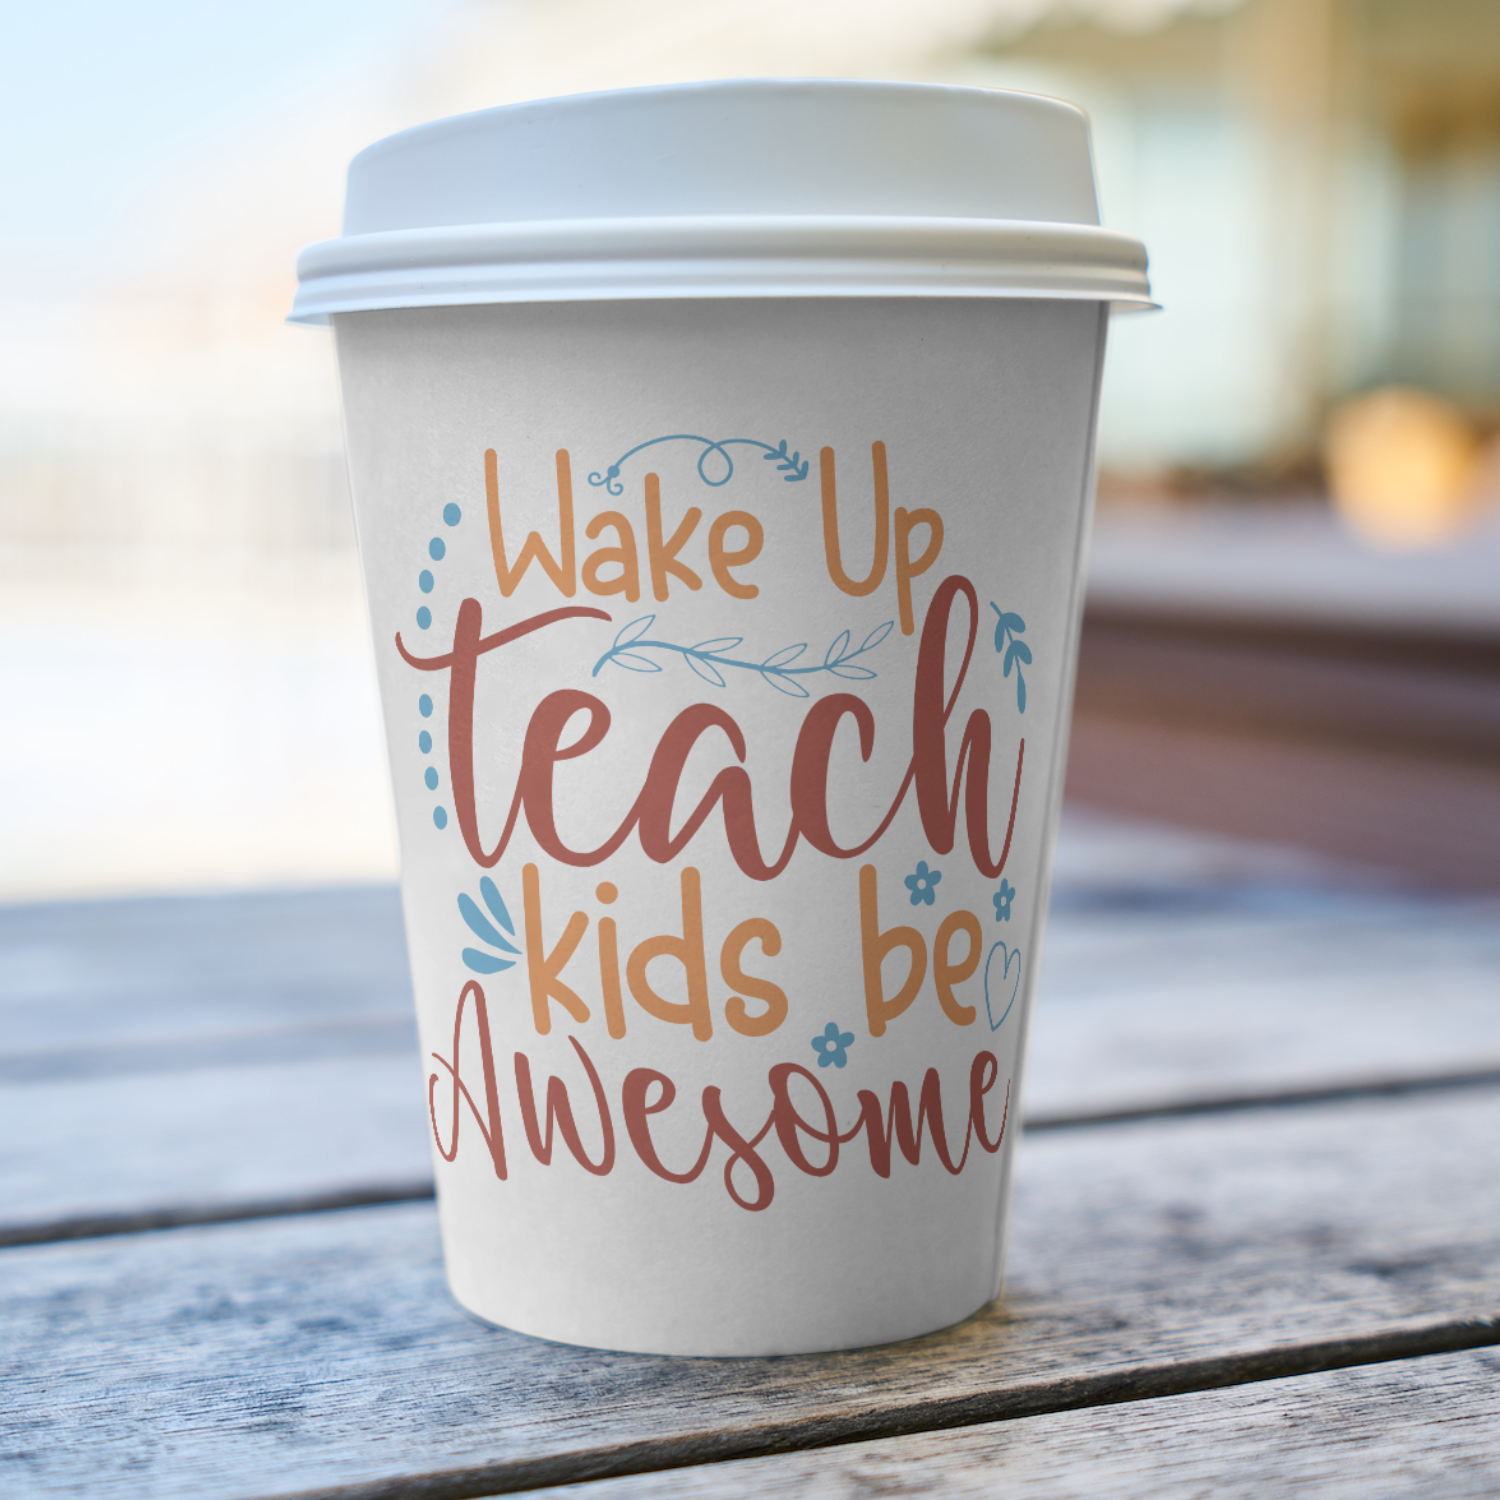 Wake up teach kids be awesome SVG | Digital Download | Cut File | SVG - Only The Sweet Stuff